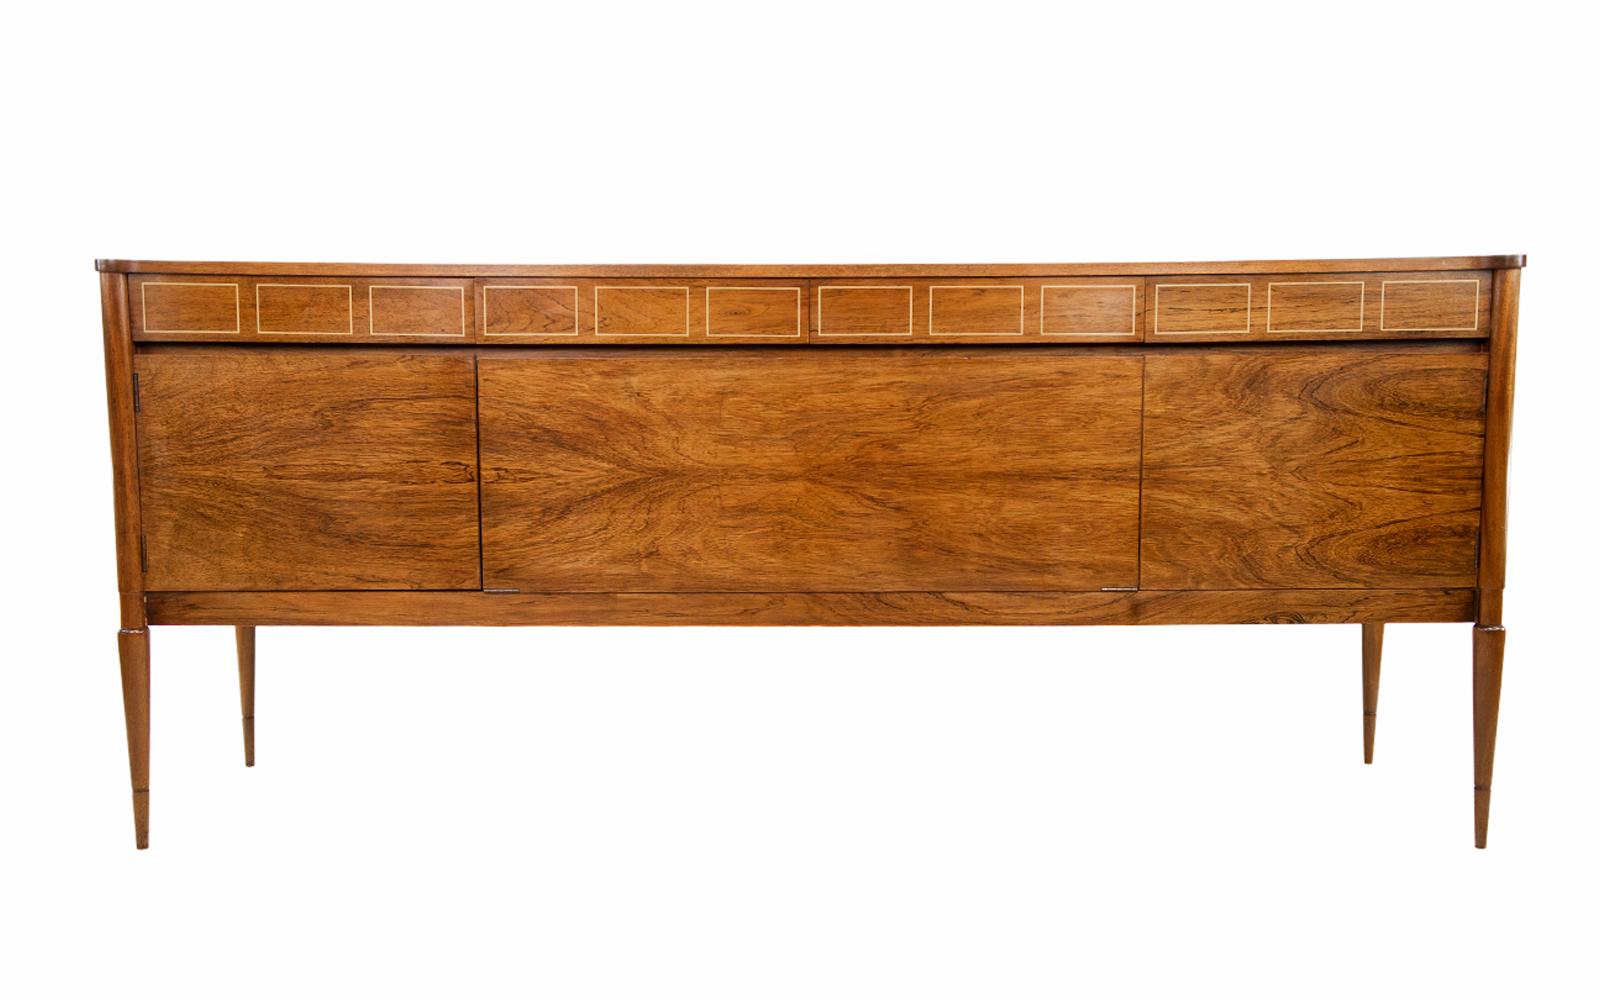 Mid-century rosewood sideboard.

A Danish design mid-20th-century rosewood sideboard.

An excellent design with a unique shape to the top surface. Beautiful rosewood detail and grain with a rectangle pattern running across the top